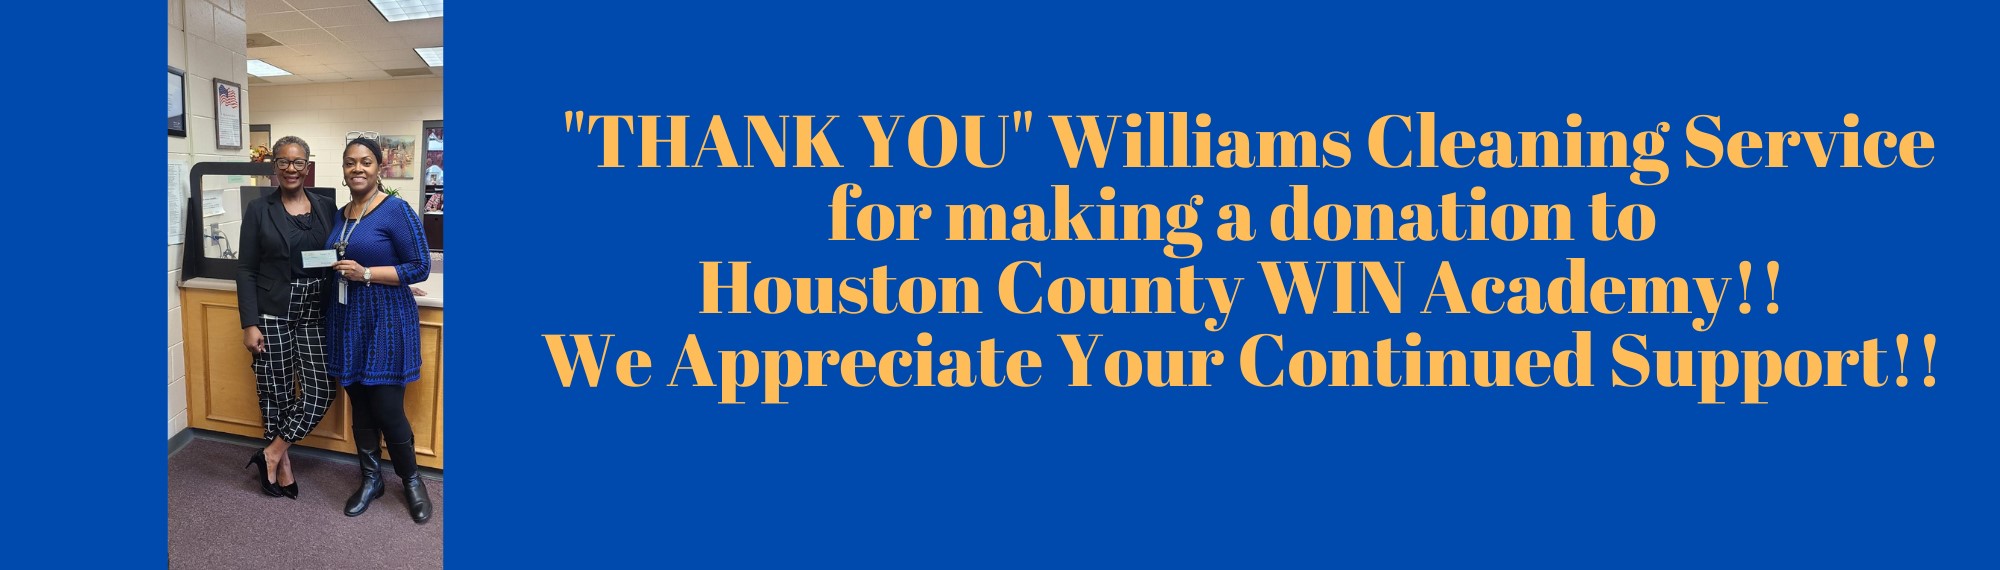 Williams Cleaning Donation